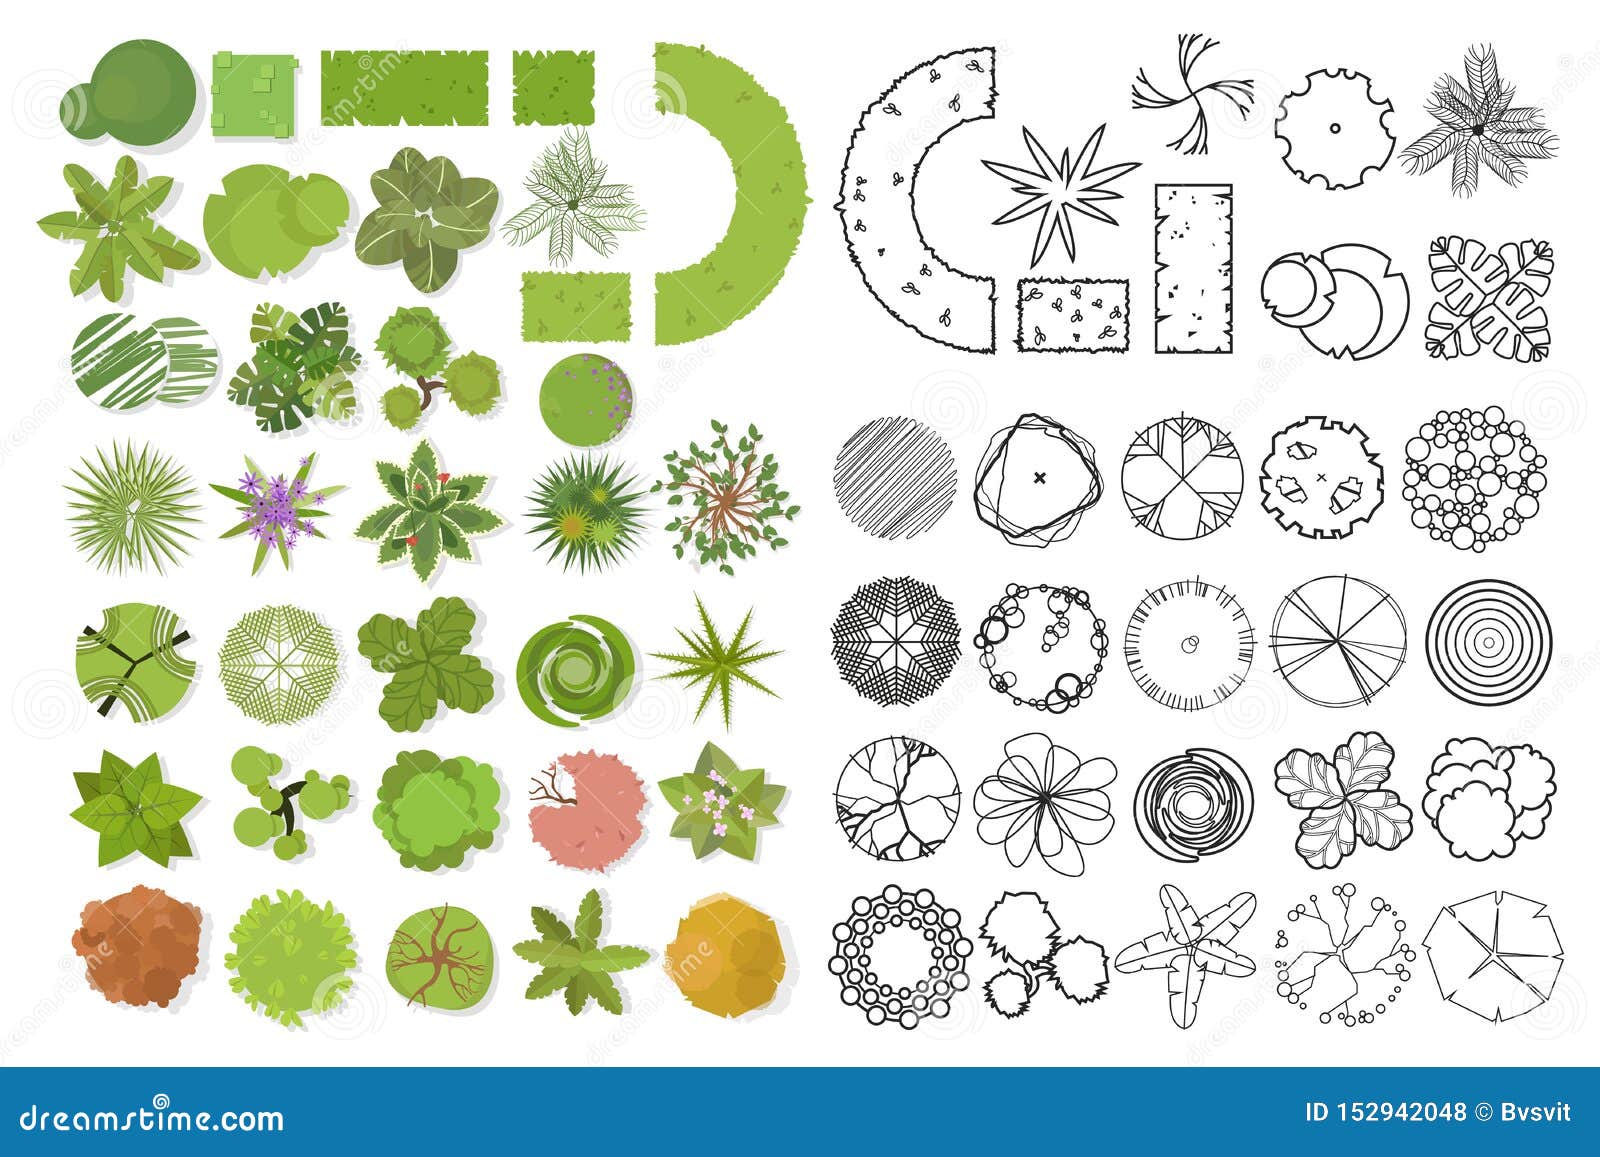 trees top view. different trees, plants  set for architectural or landscape . set of linear and color flat  illustrati